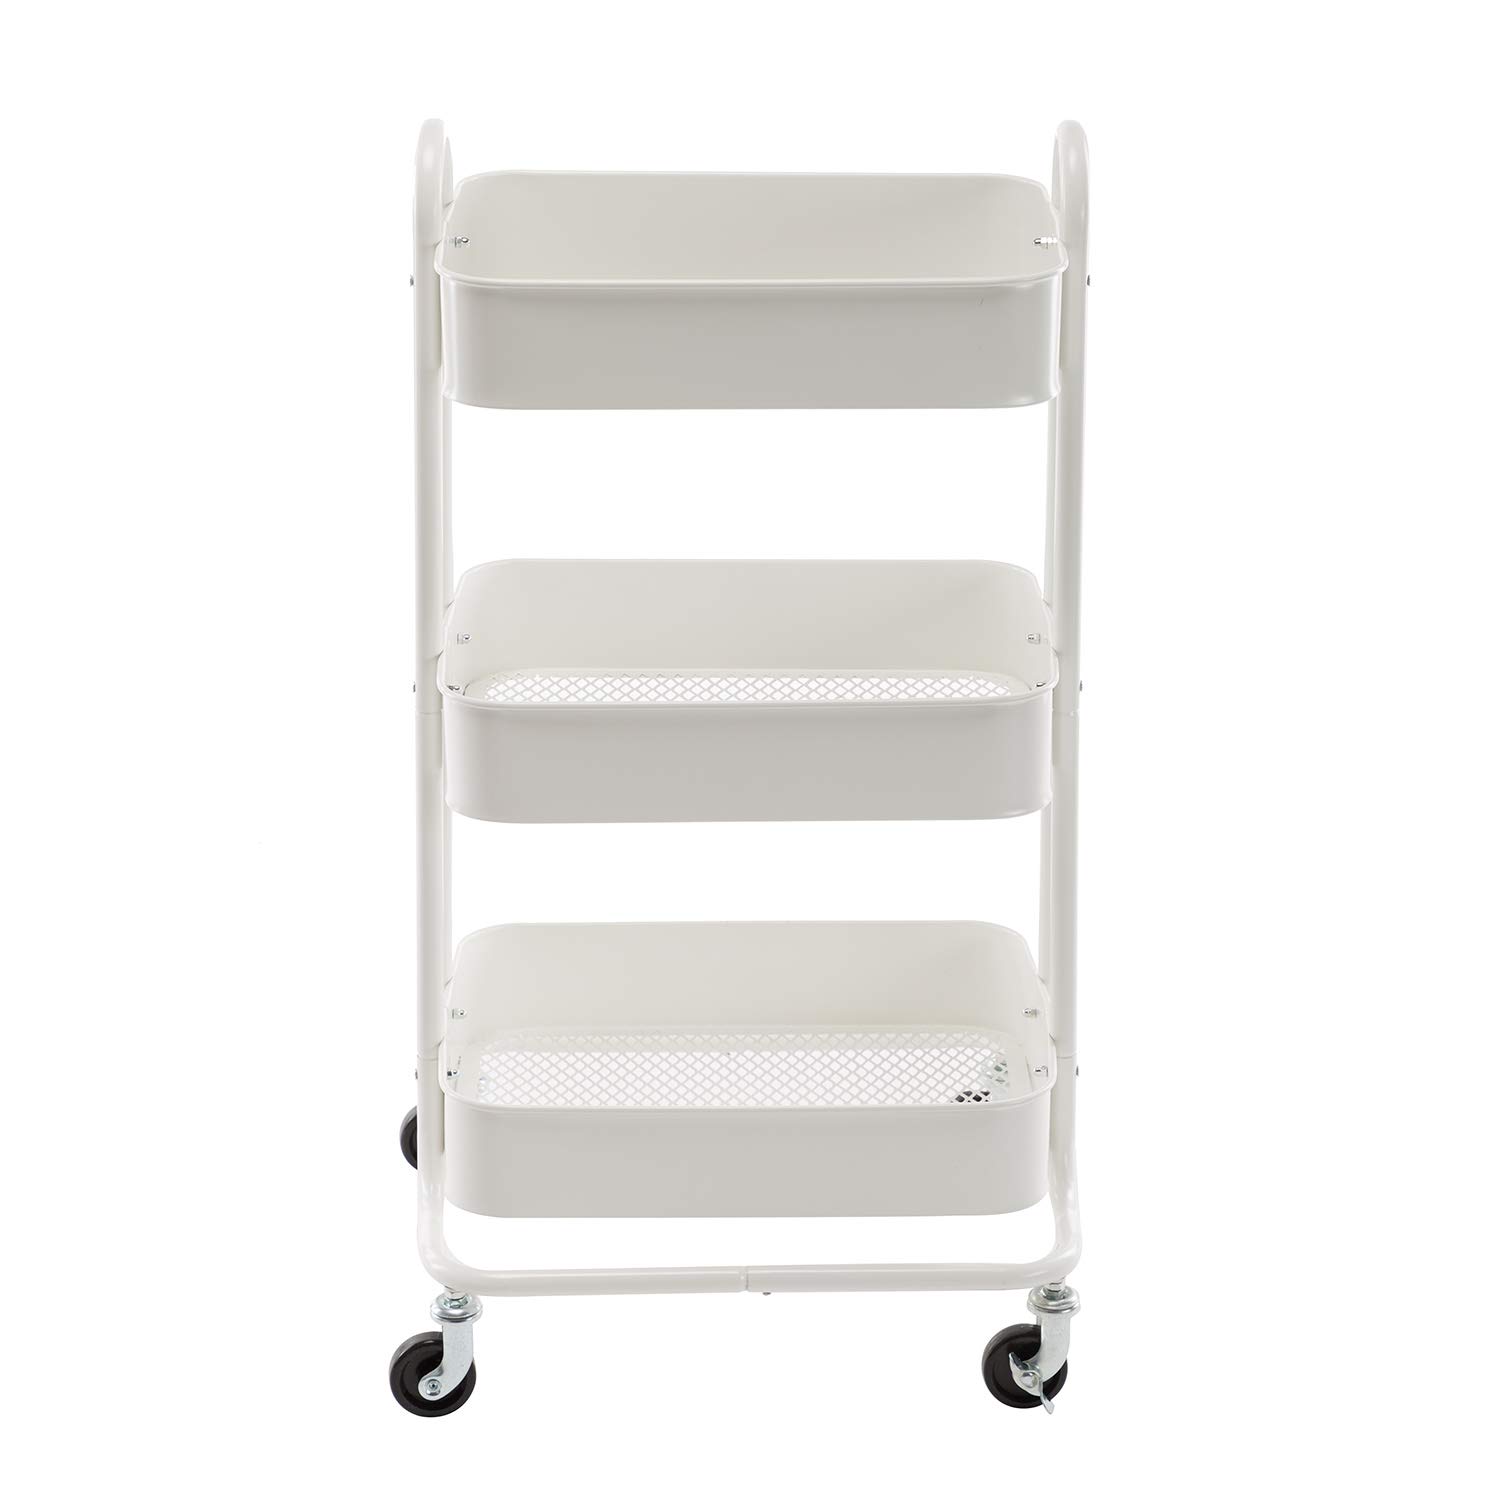 walsport 3-Tier Utility Carts for Kitchen Bathroom Bedroom Office, Rolling Cart Metal Mesh Storage Organizer Mobile Utility Cart with Caster Wheels with Handle,White